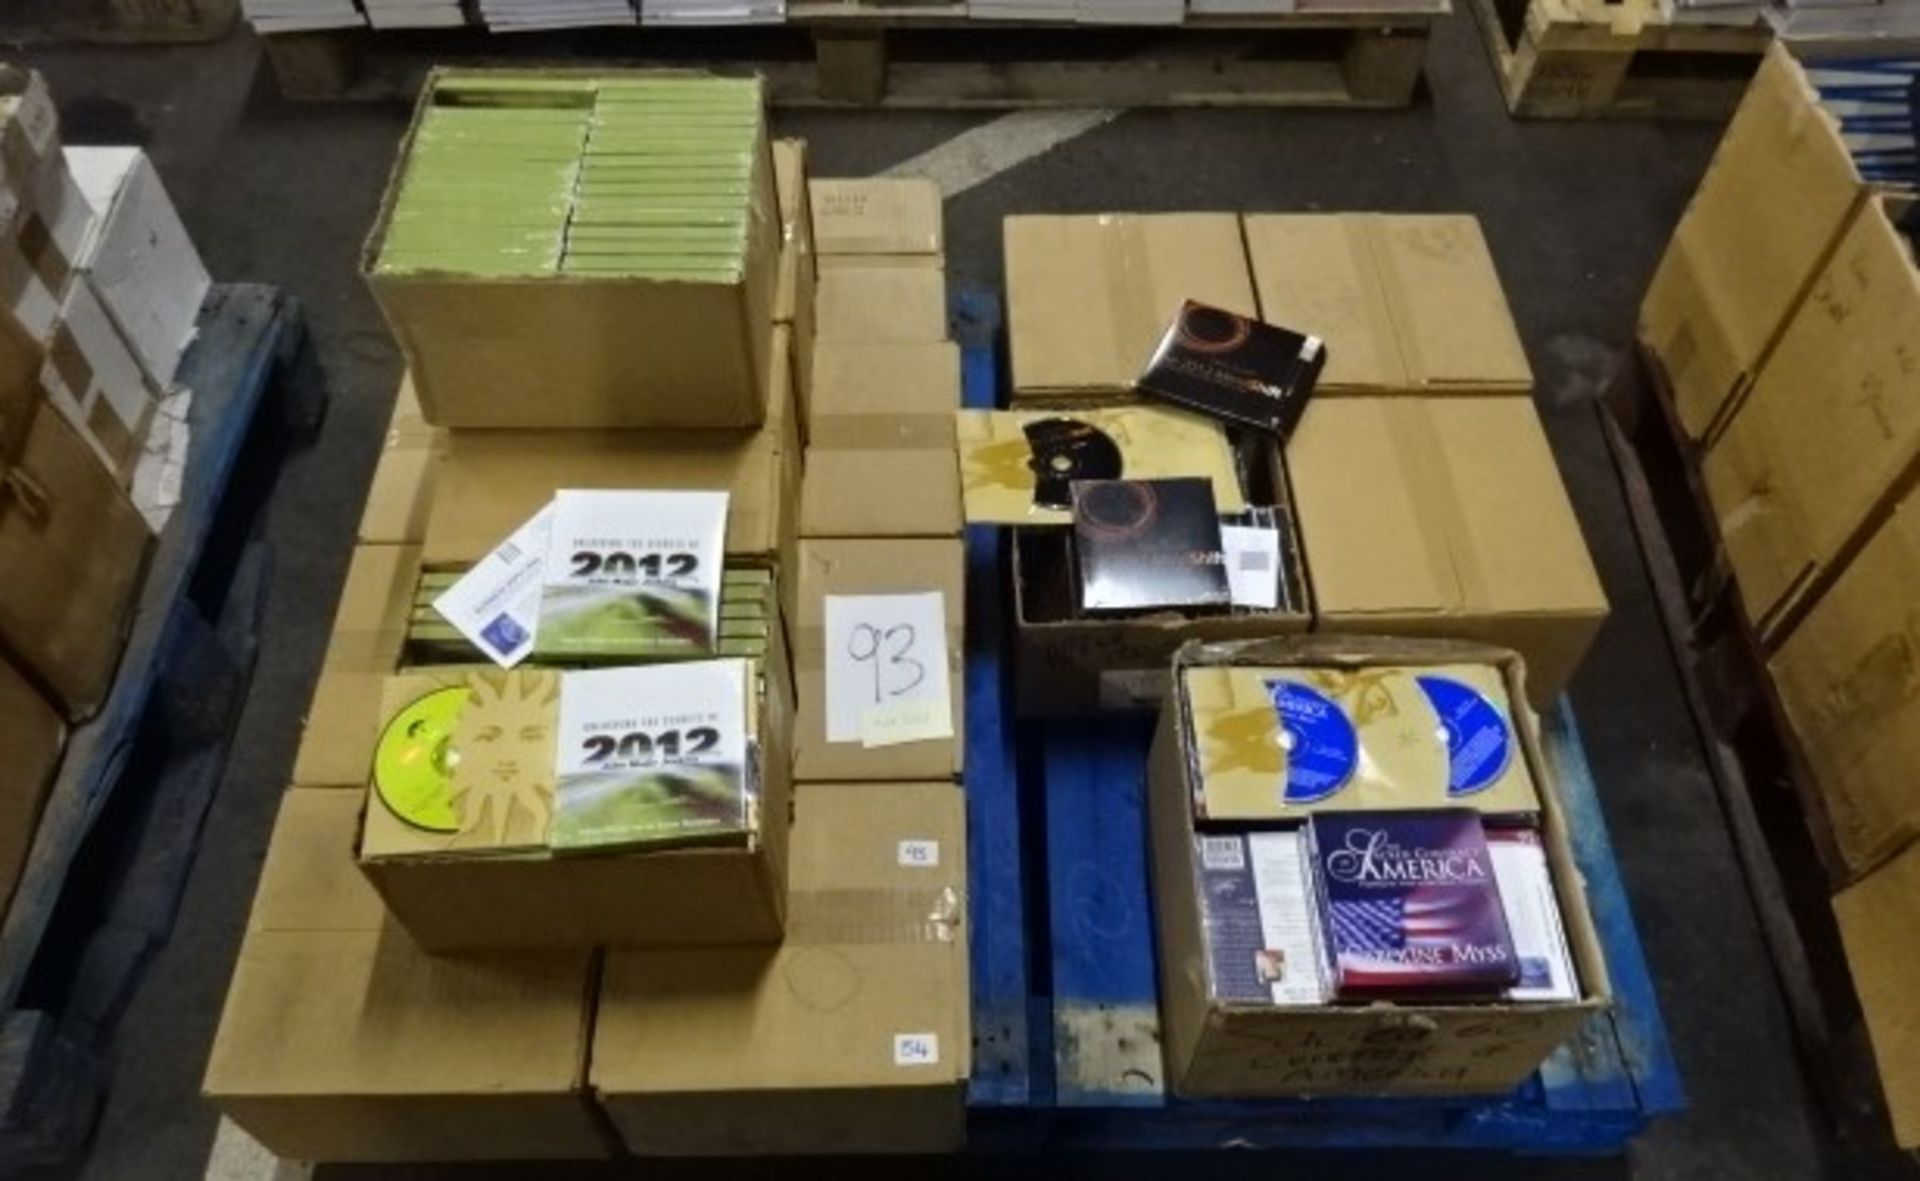 PALLET OF 2012, AMERICA AND MEDITATION CDS.